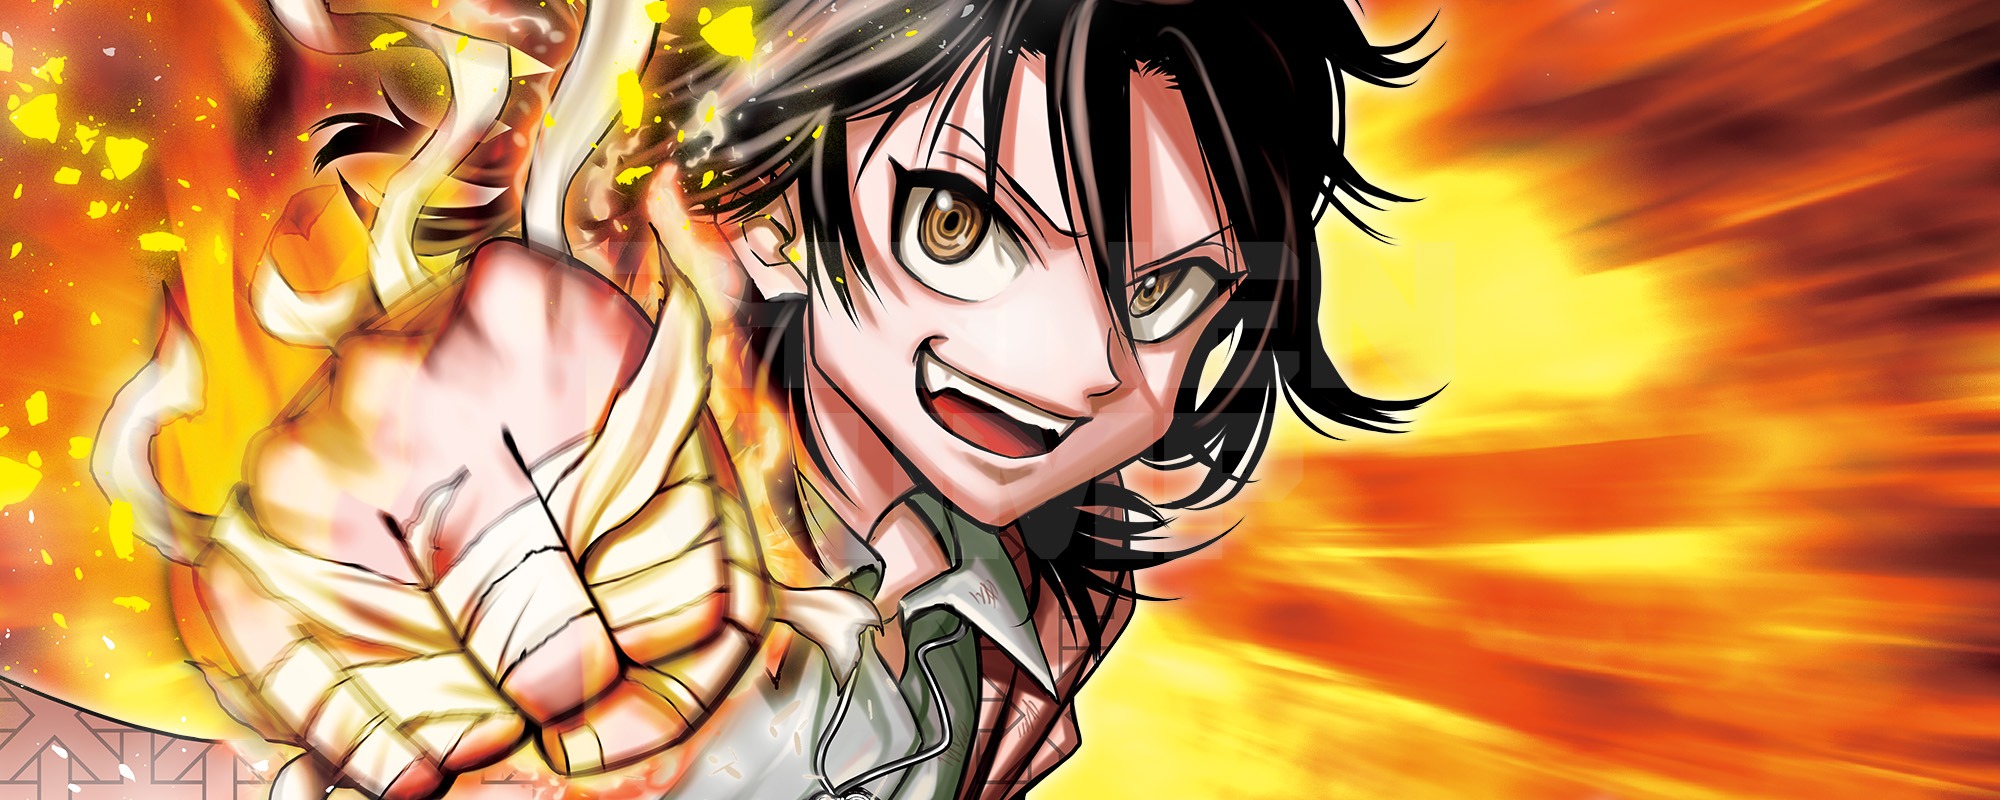 The Fight Begins in Shonen Jump’s Newest Manga Do Retry